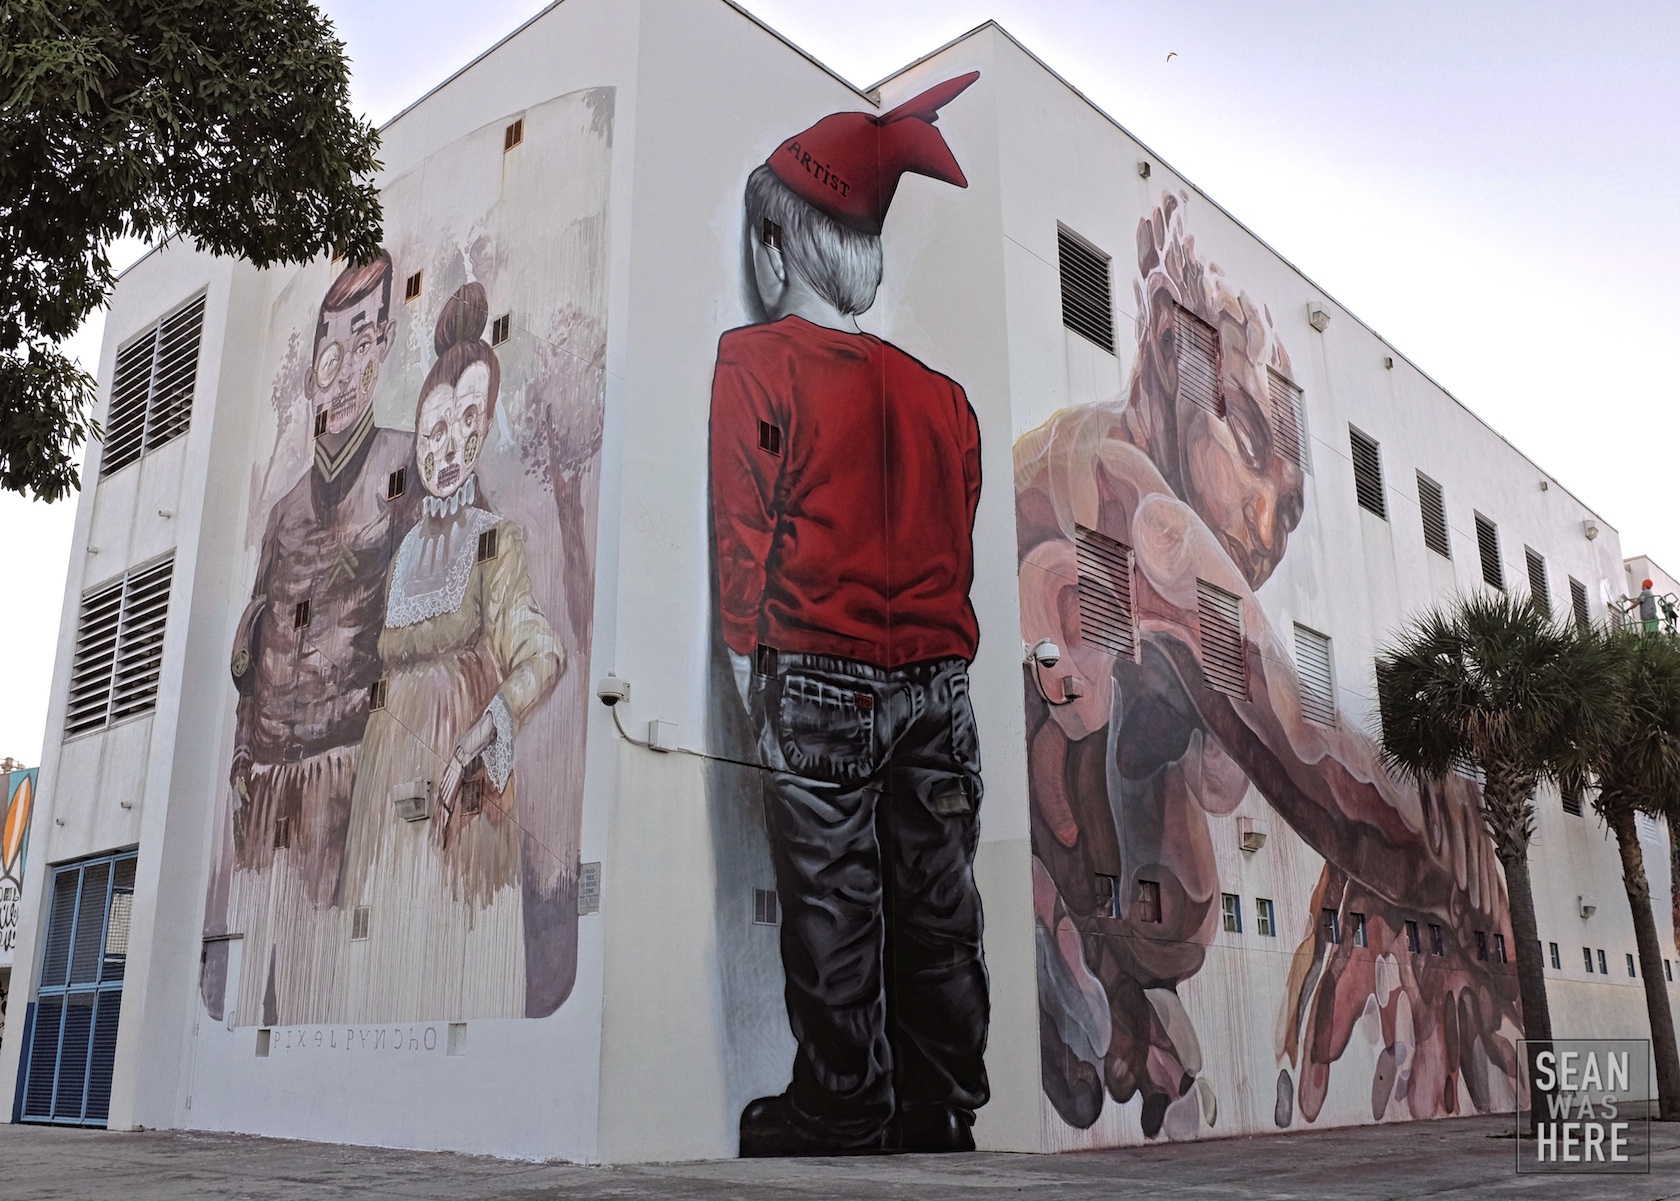 Pixel Pancho (Turino, Italy), MTO (France->Berlin) and Paola Delfin (Mexico. DF). Amazing walls back to back at the Jose De Diego Middle School. Wynwood Miami